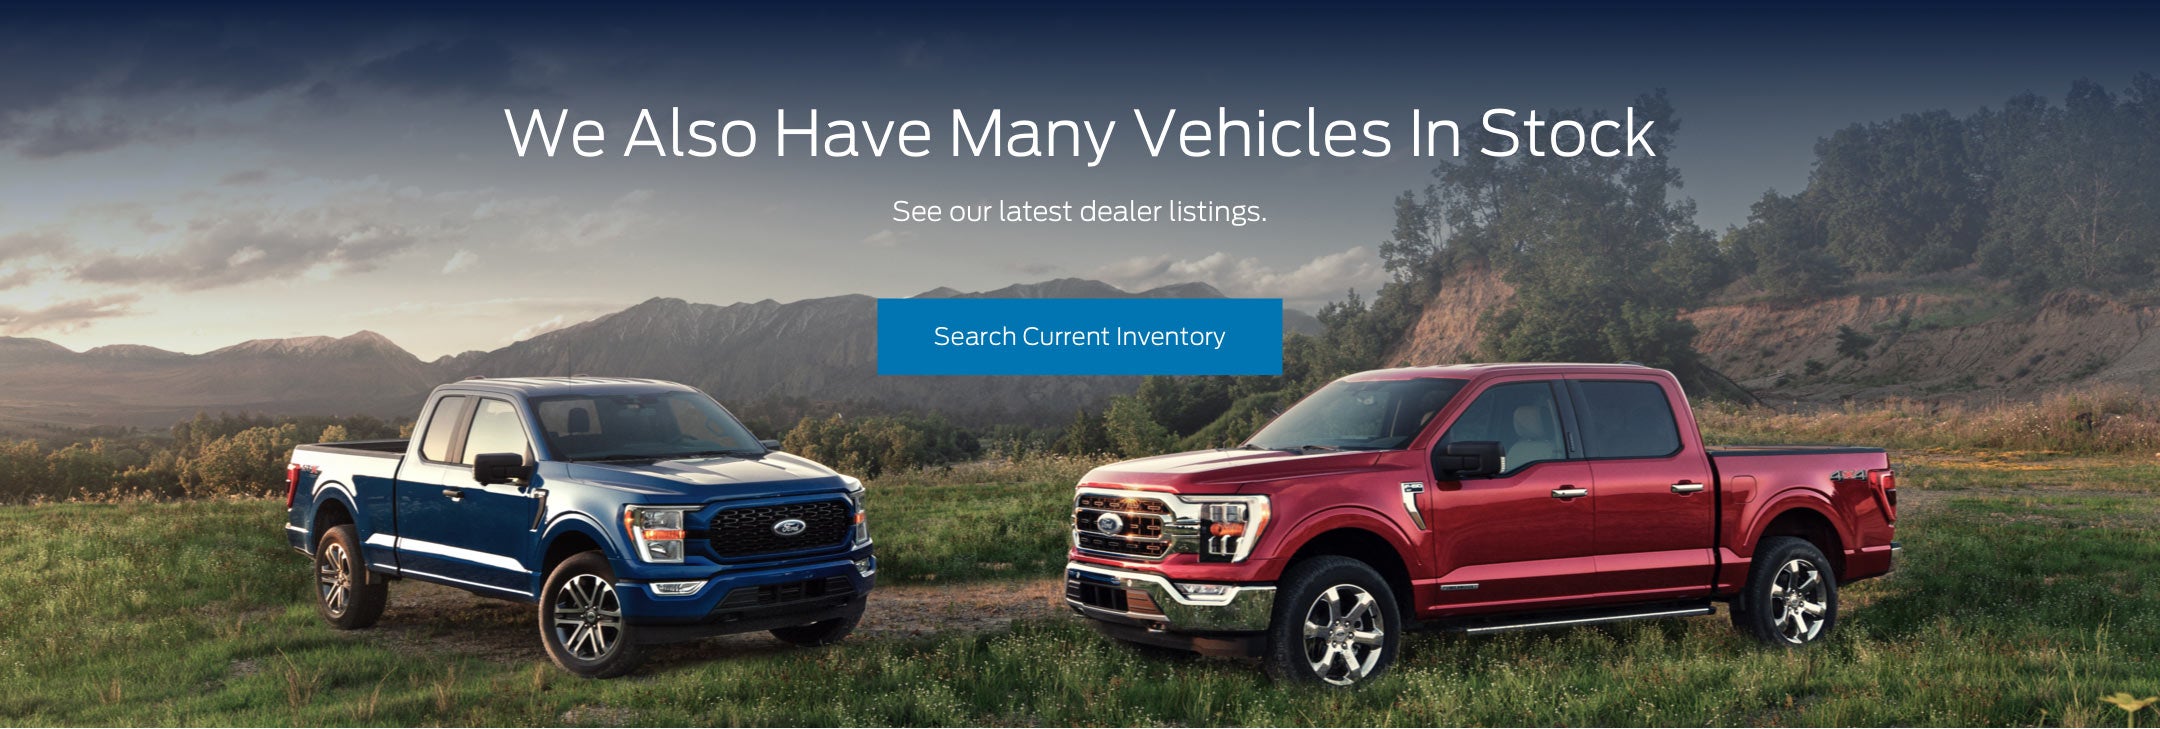 Ford vehicles in stock | Crossroads Ford Sanford in Sanford NC